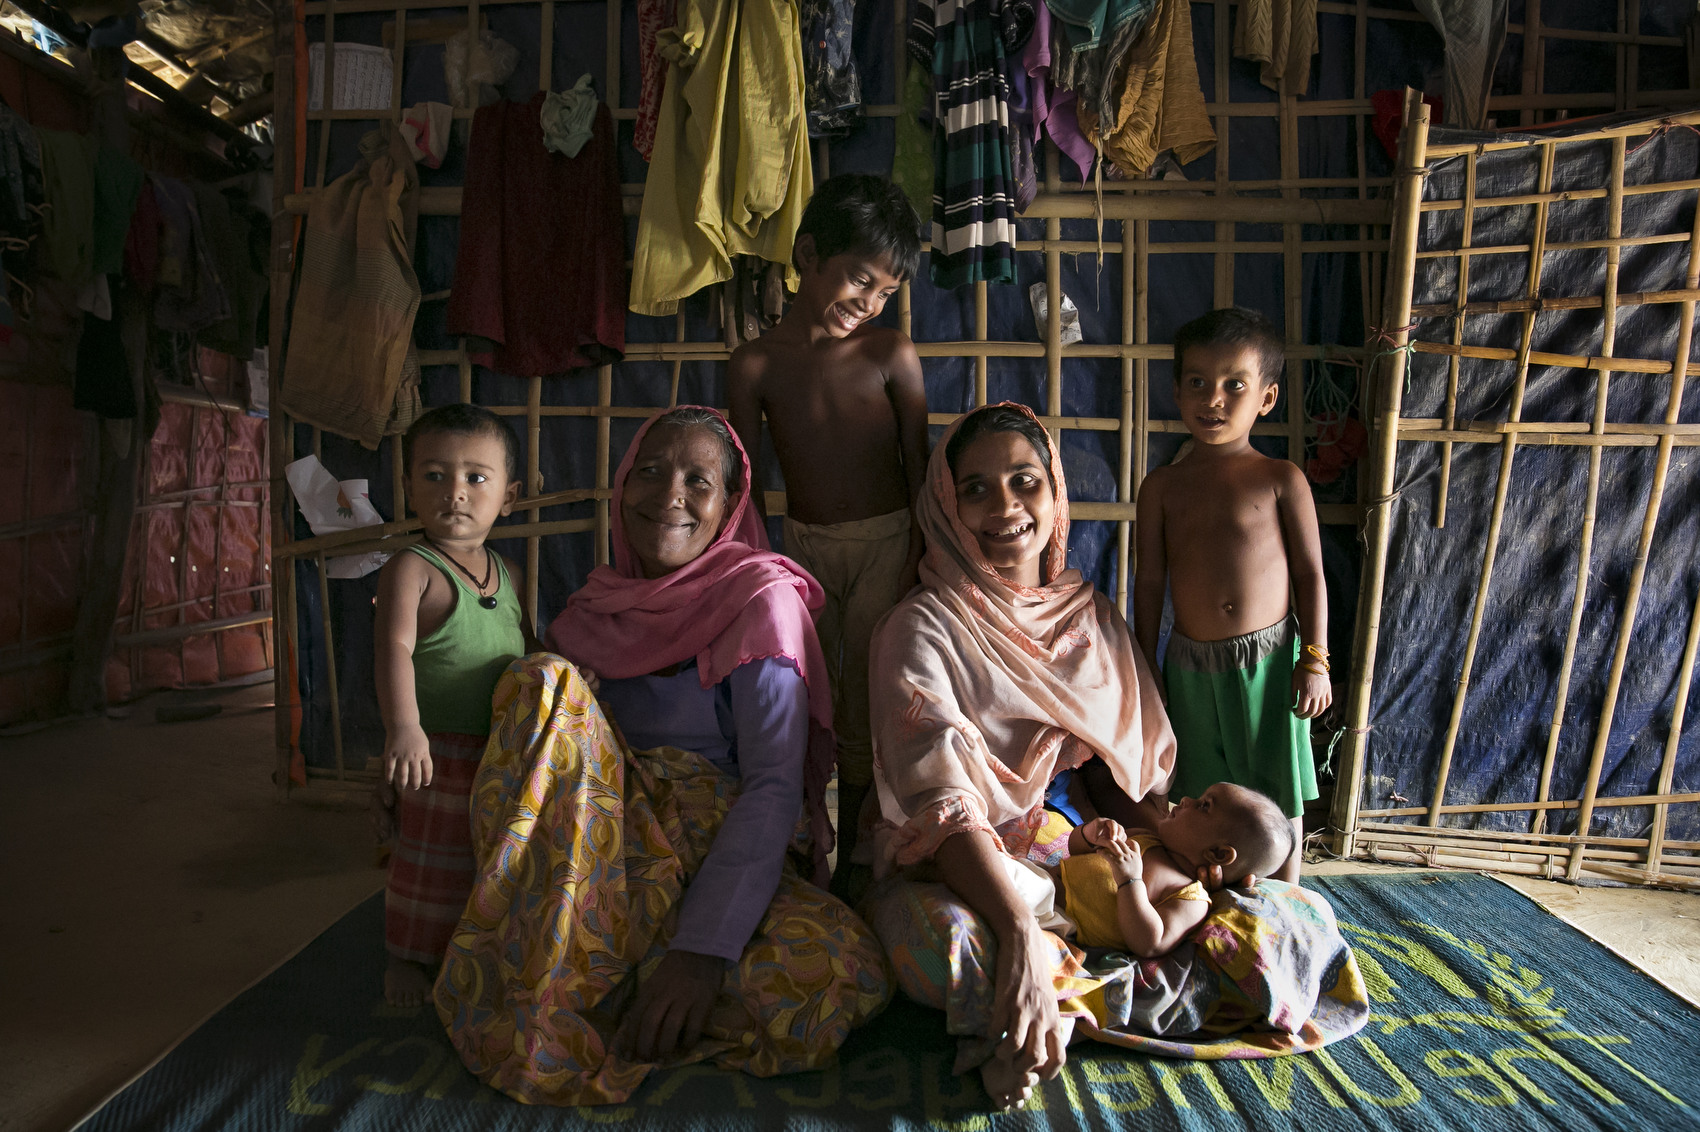 Mother Rohana Begum (25) (center in light pink scarf) baby Khotija (2.5 months), grandmother Toslima (56) (center in dark pink scarf), siblings Mohammed Haque (3), Asmara Bibi (6) and Rohara (7) pose for a photo  September 30, 2018 in the Rohingya refugee camp in Cox's Bazar, Bangladesh. Rohana was brought to the PHCC when she started hemorrhaging immediately after childbirth. When she was stabilised, the PHCC team put her in an ambulance and took her to a hospital, where she received emergency treatment. She made a full recovery. Now, Rohana and Khotija are doing well. They have been back to the PHCC several times for checkups, and Rohana is very happy with the care they have received. Rohana thinks she would have died if it had not been for Save the Children. They now tell other Rohingya women to give birth in the maternity ward at the PHCC, because it is safe and they can receive emergency treatment if needed. 